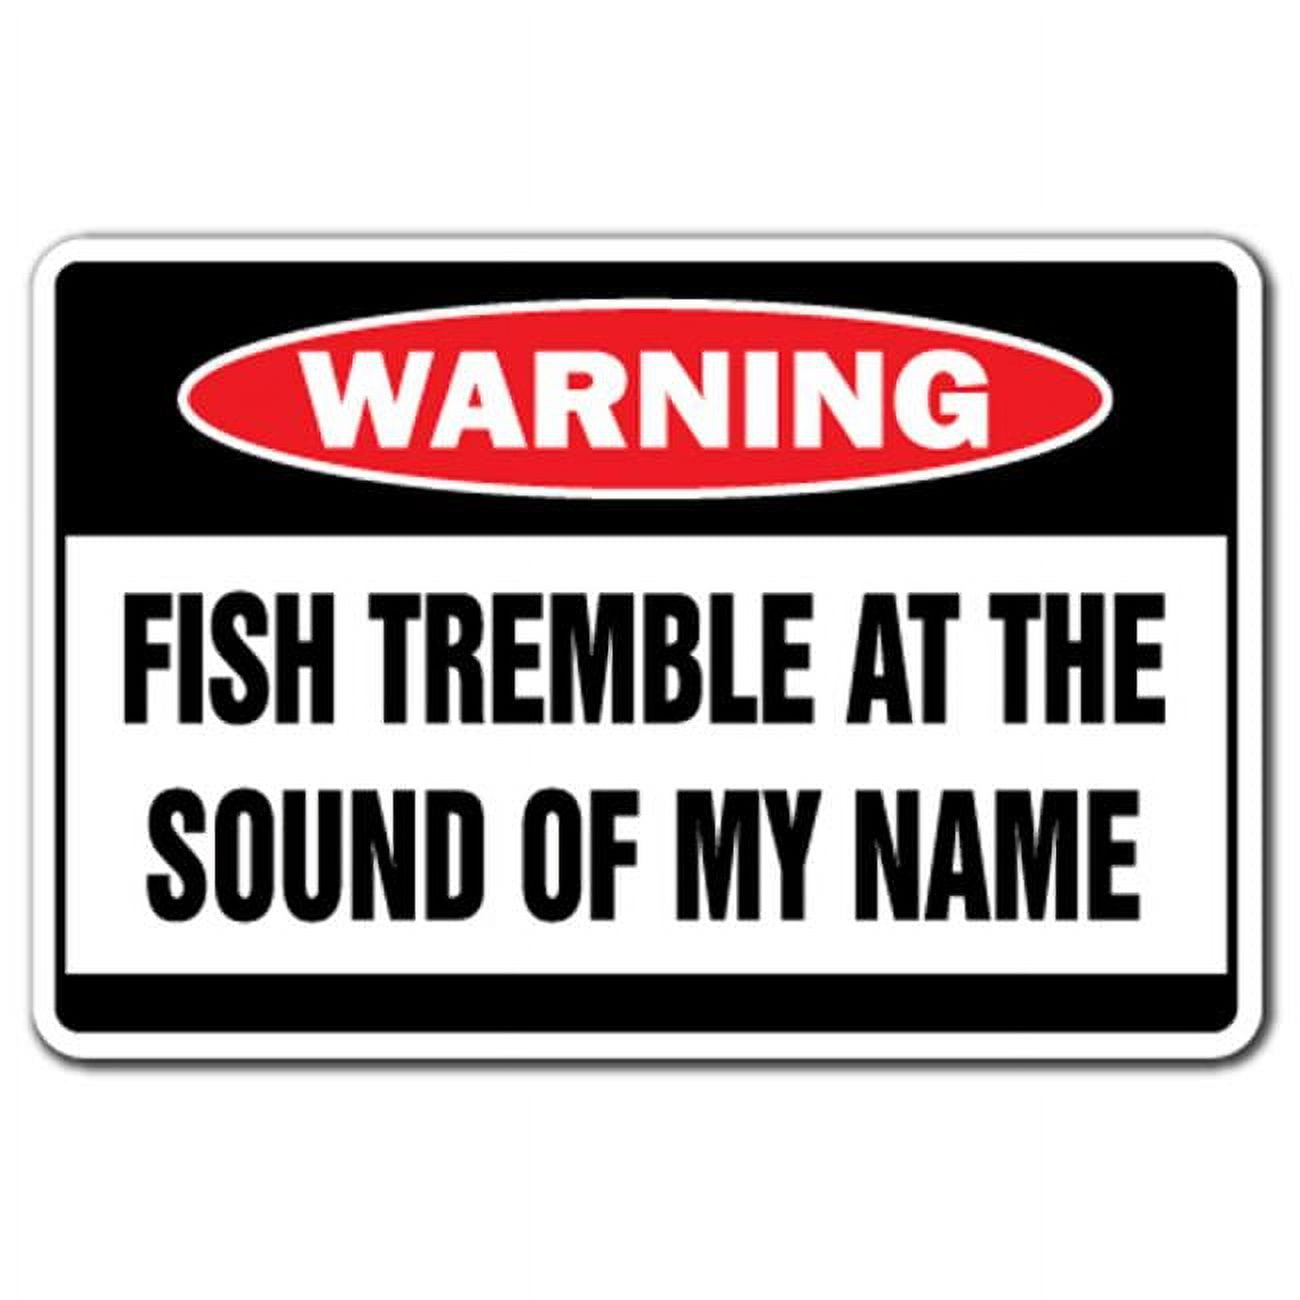 SignMission 5 x 7 in. Fish Tremble Warning Decal - Fishing